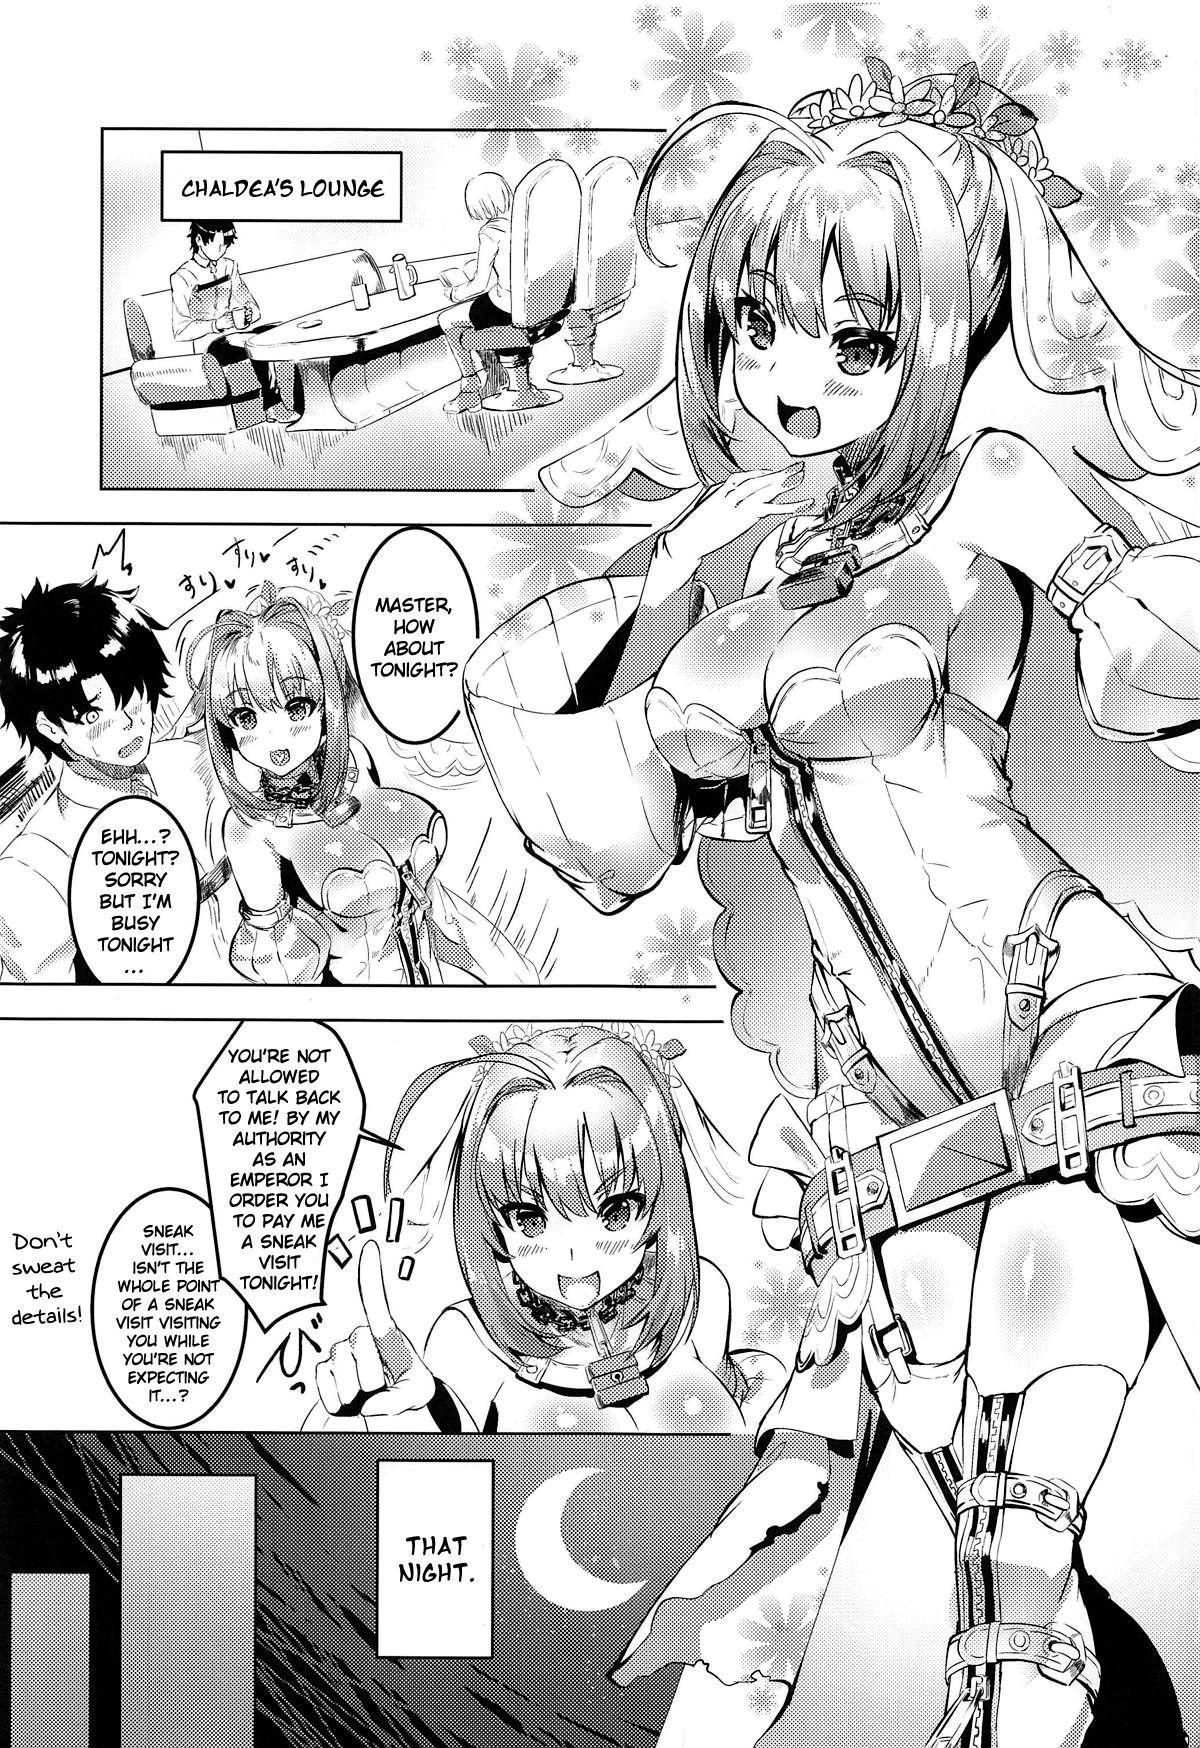 Hard Core Sex Koutei to Oni no Erohon | An Ero Book About an Emperor and an Oni - Fate grand order Pool - Page 2